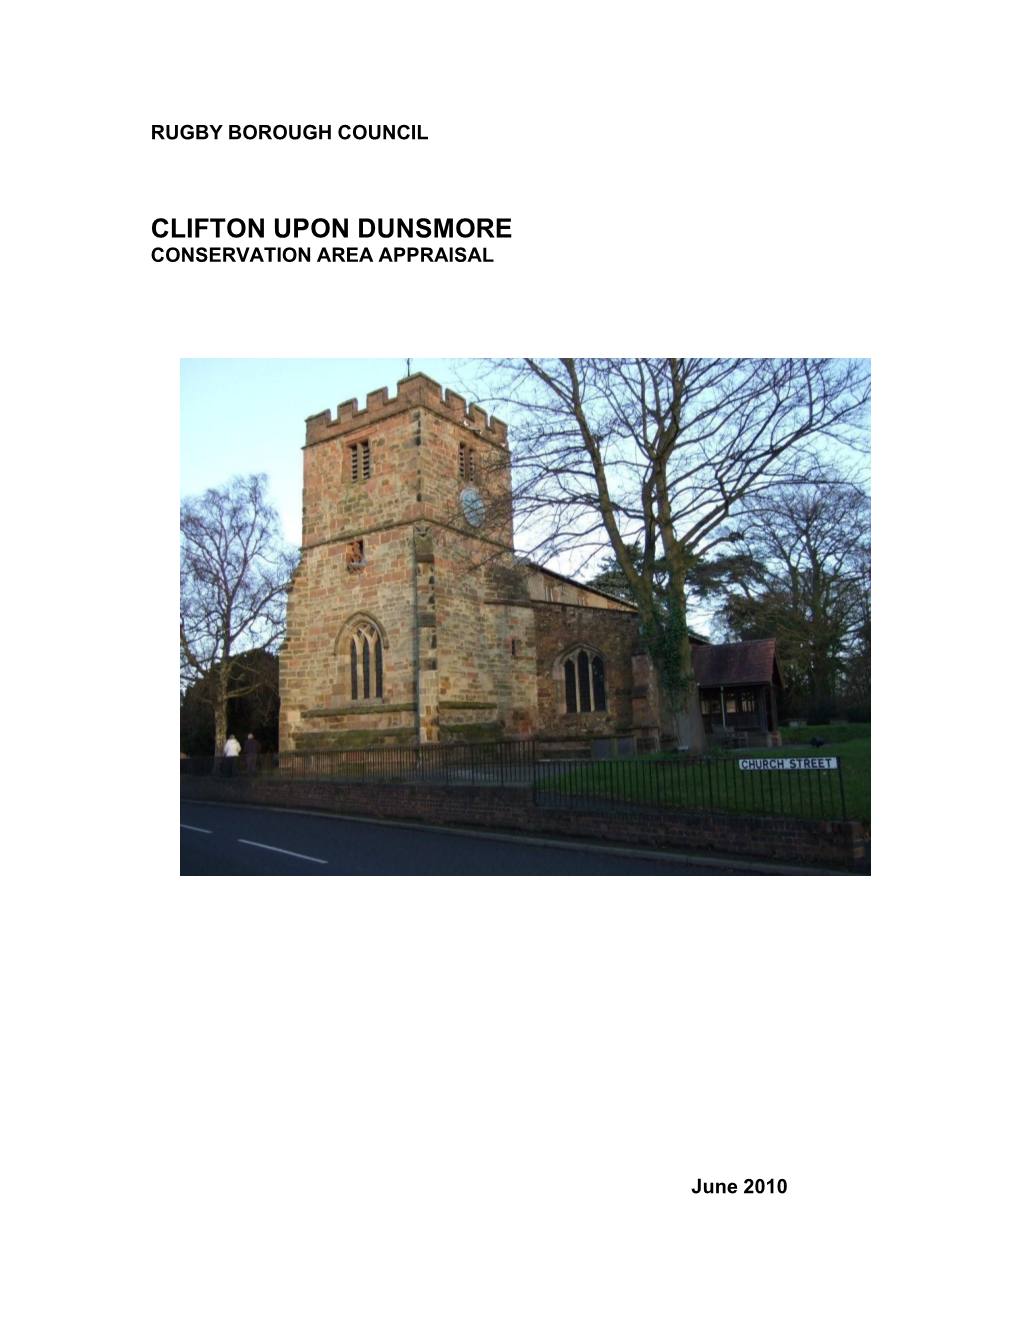 Clifton Upon Dunsmore Conservation Area Appraisal